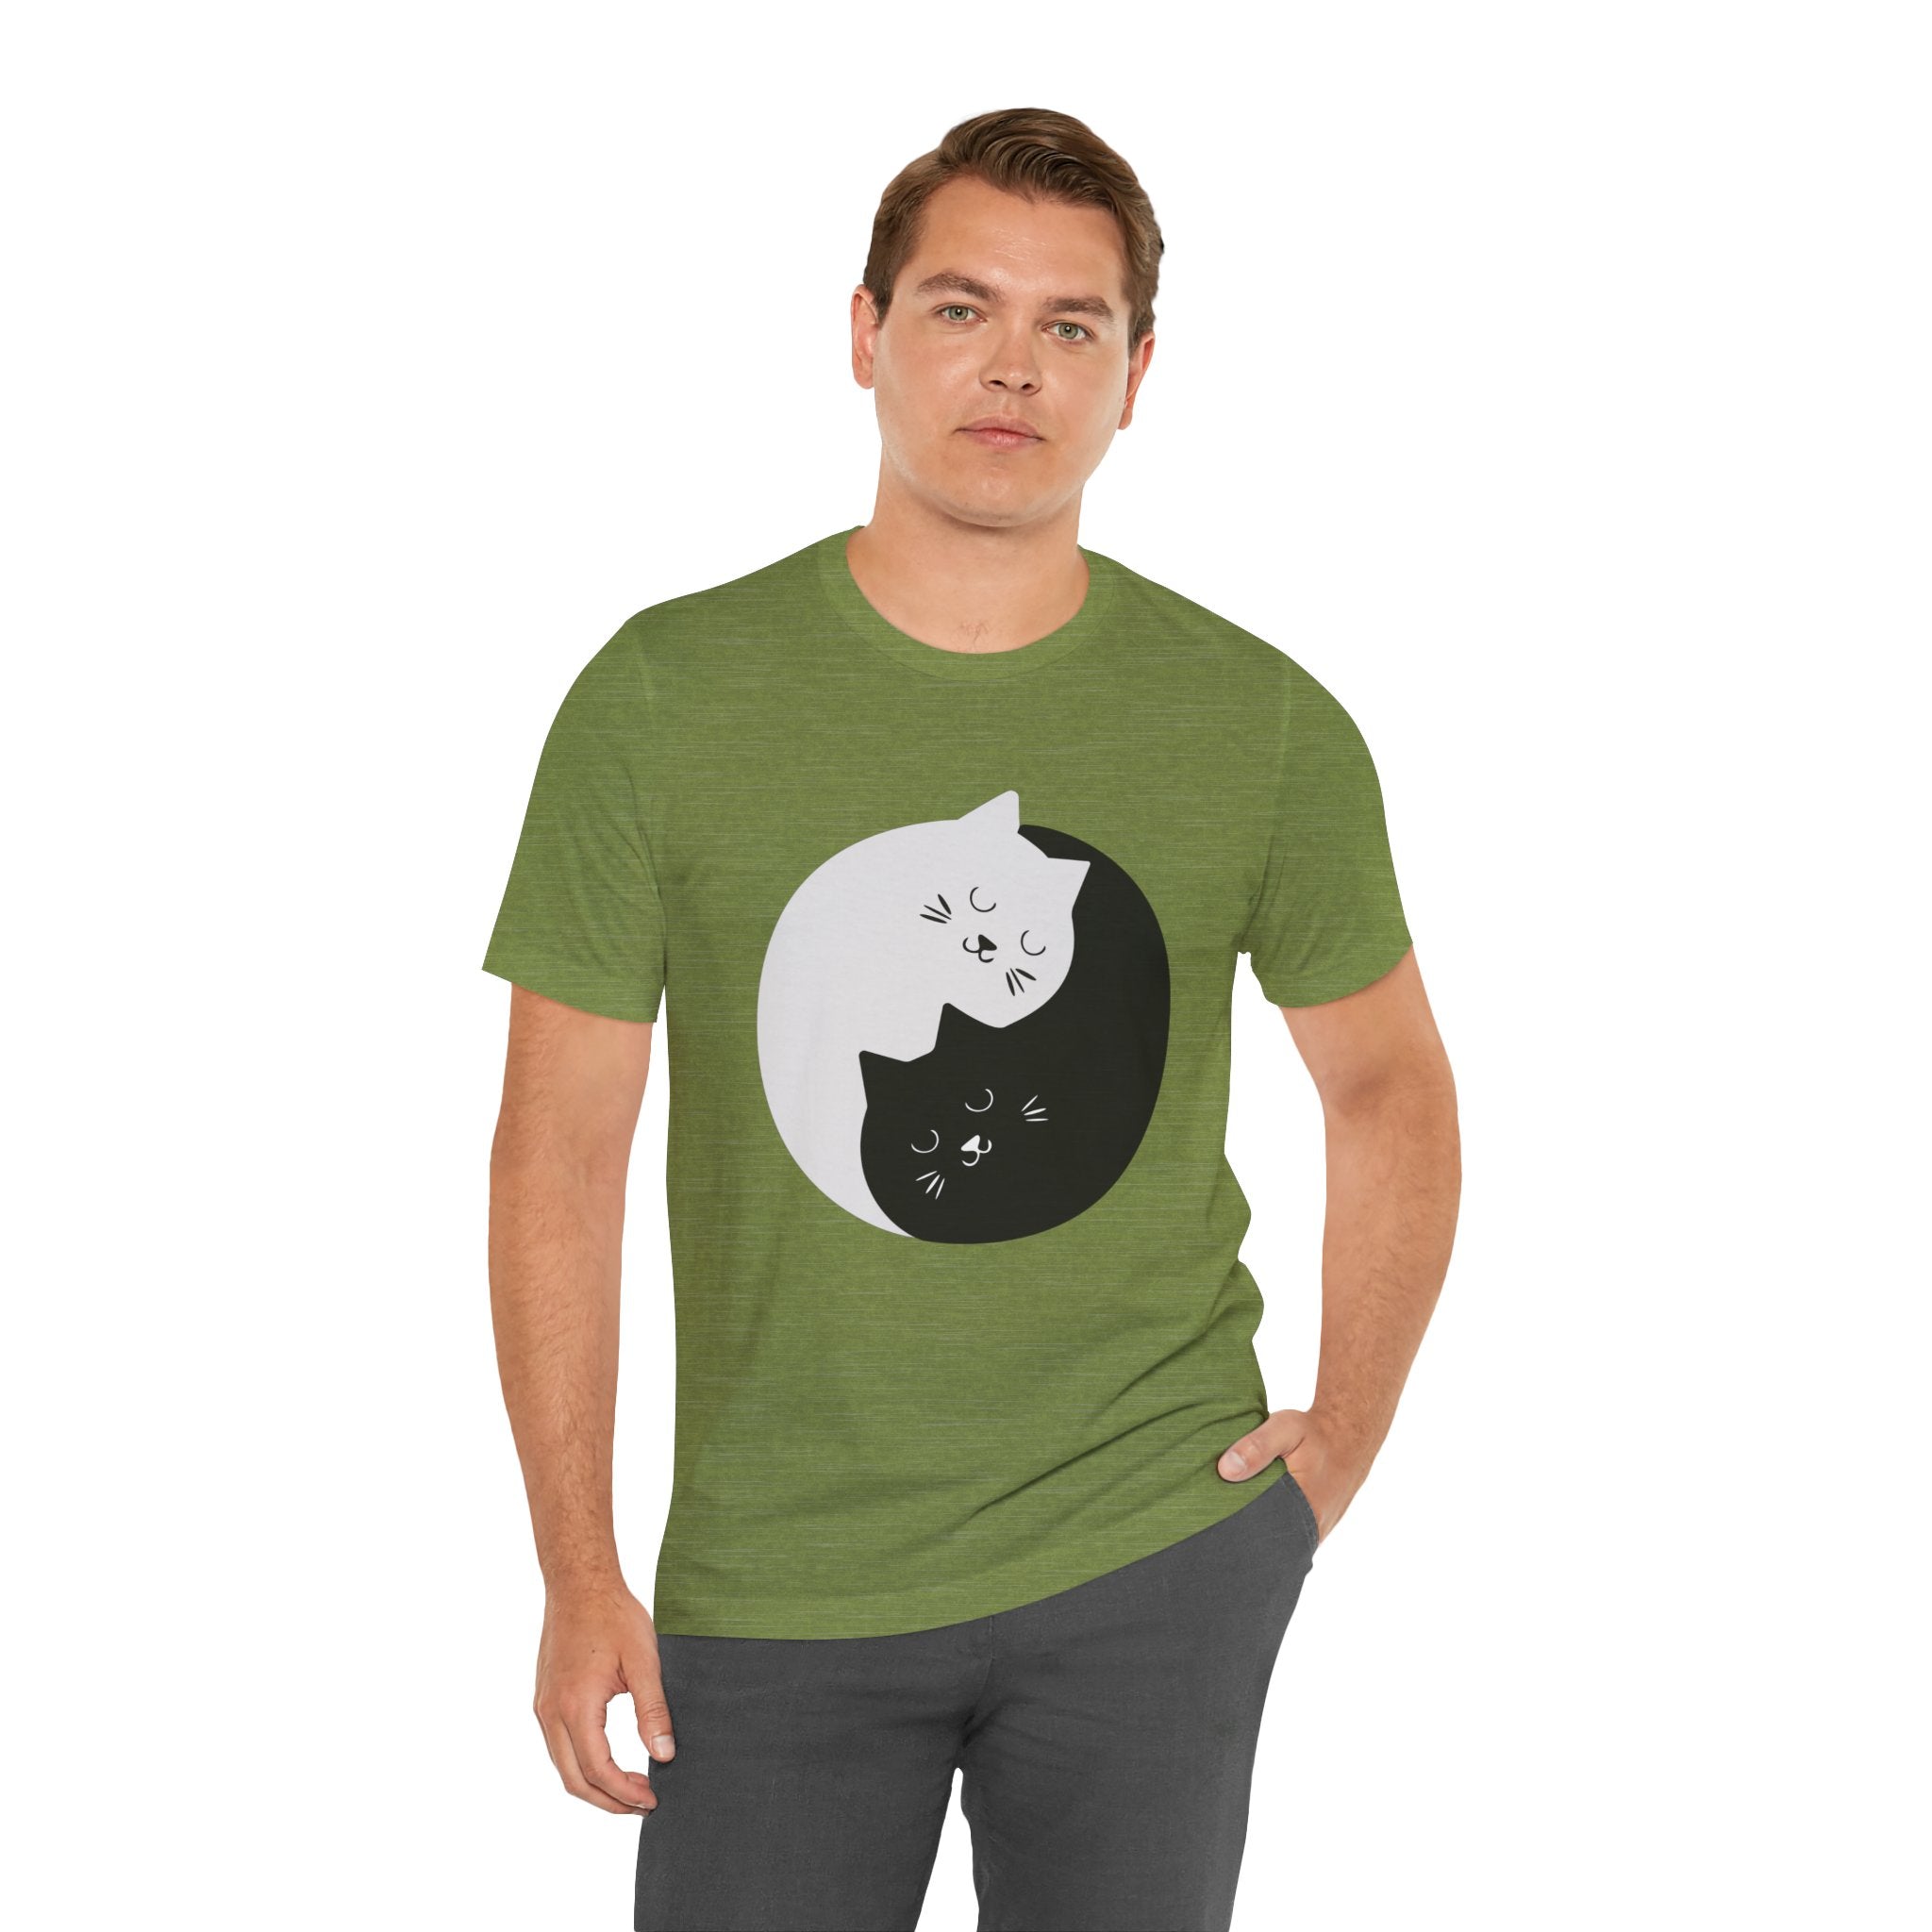 Man in a green YING-ANG KITTIES T-shirt, standing against a plain background.